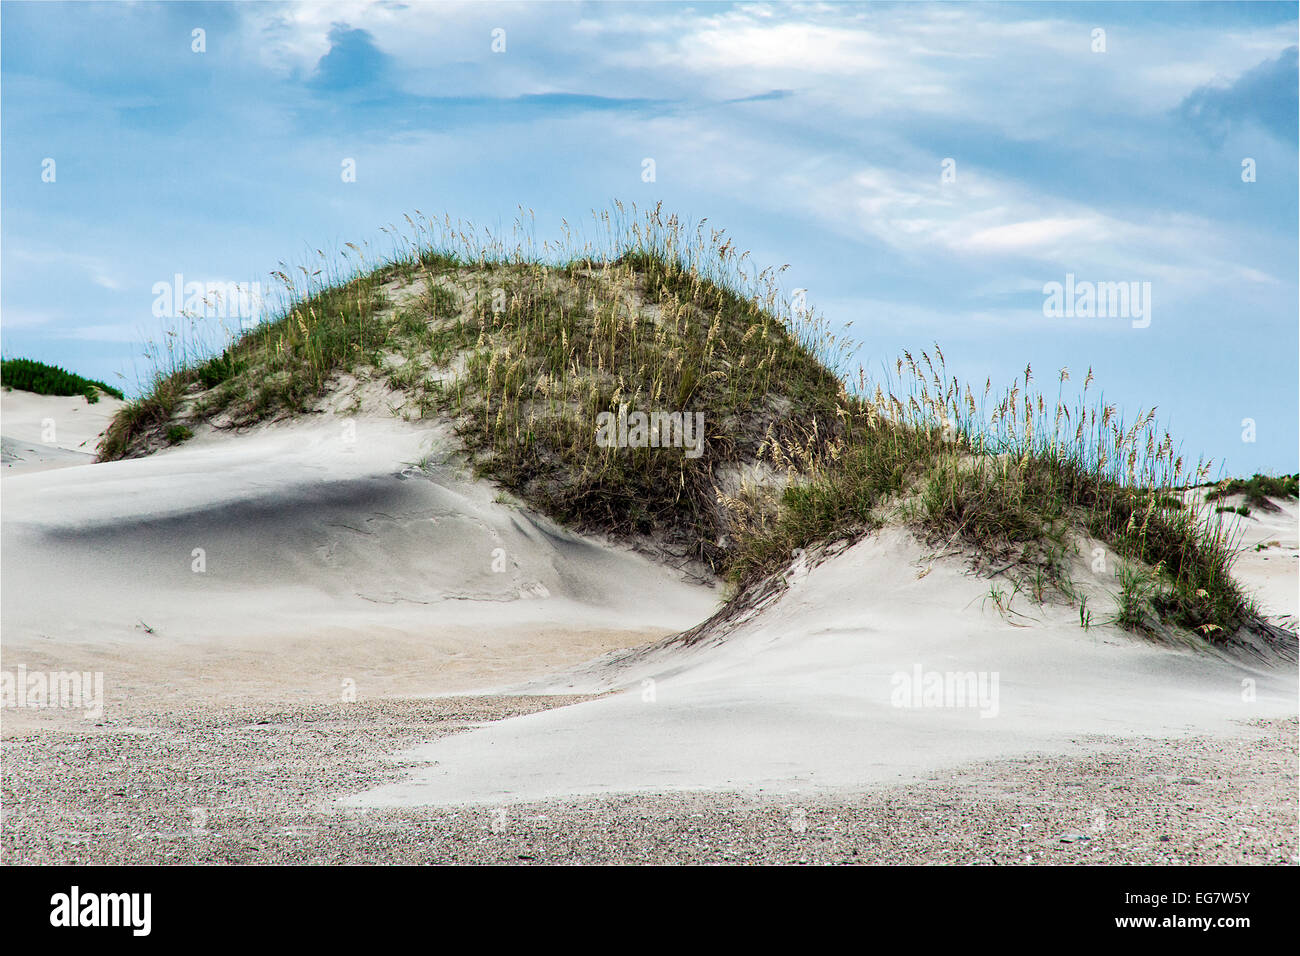 Dune mound and sea oats, Outer Banks, North Caolina, USA Stock Photo